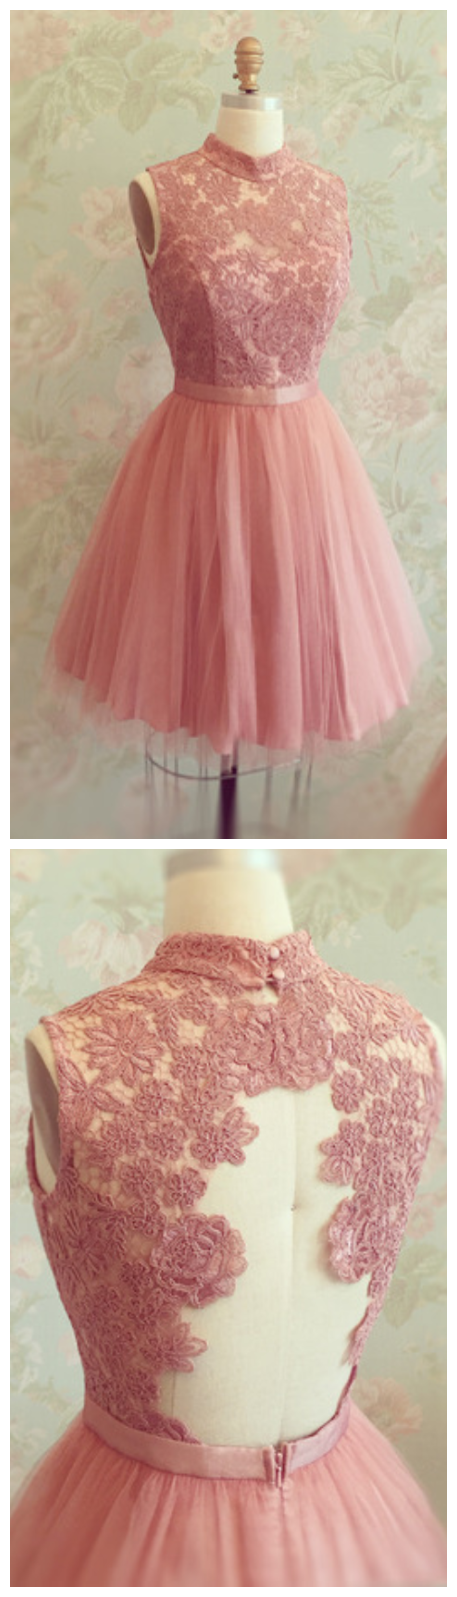 High Neck Homecoming Dress,lace Tulle Homecoming Dresses